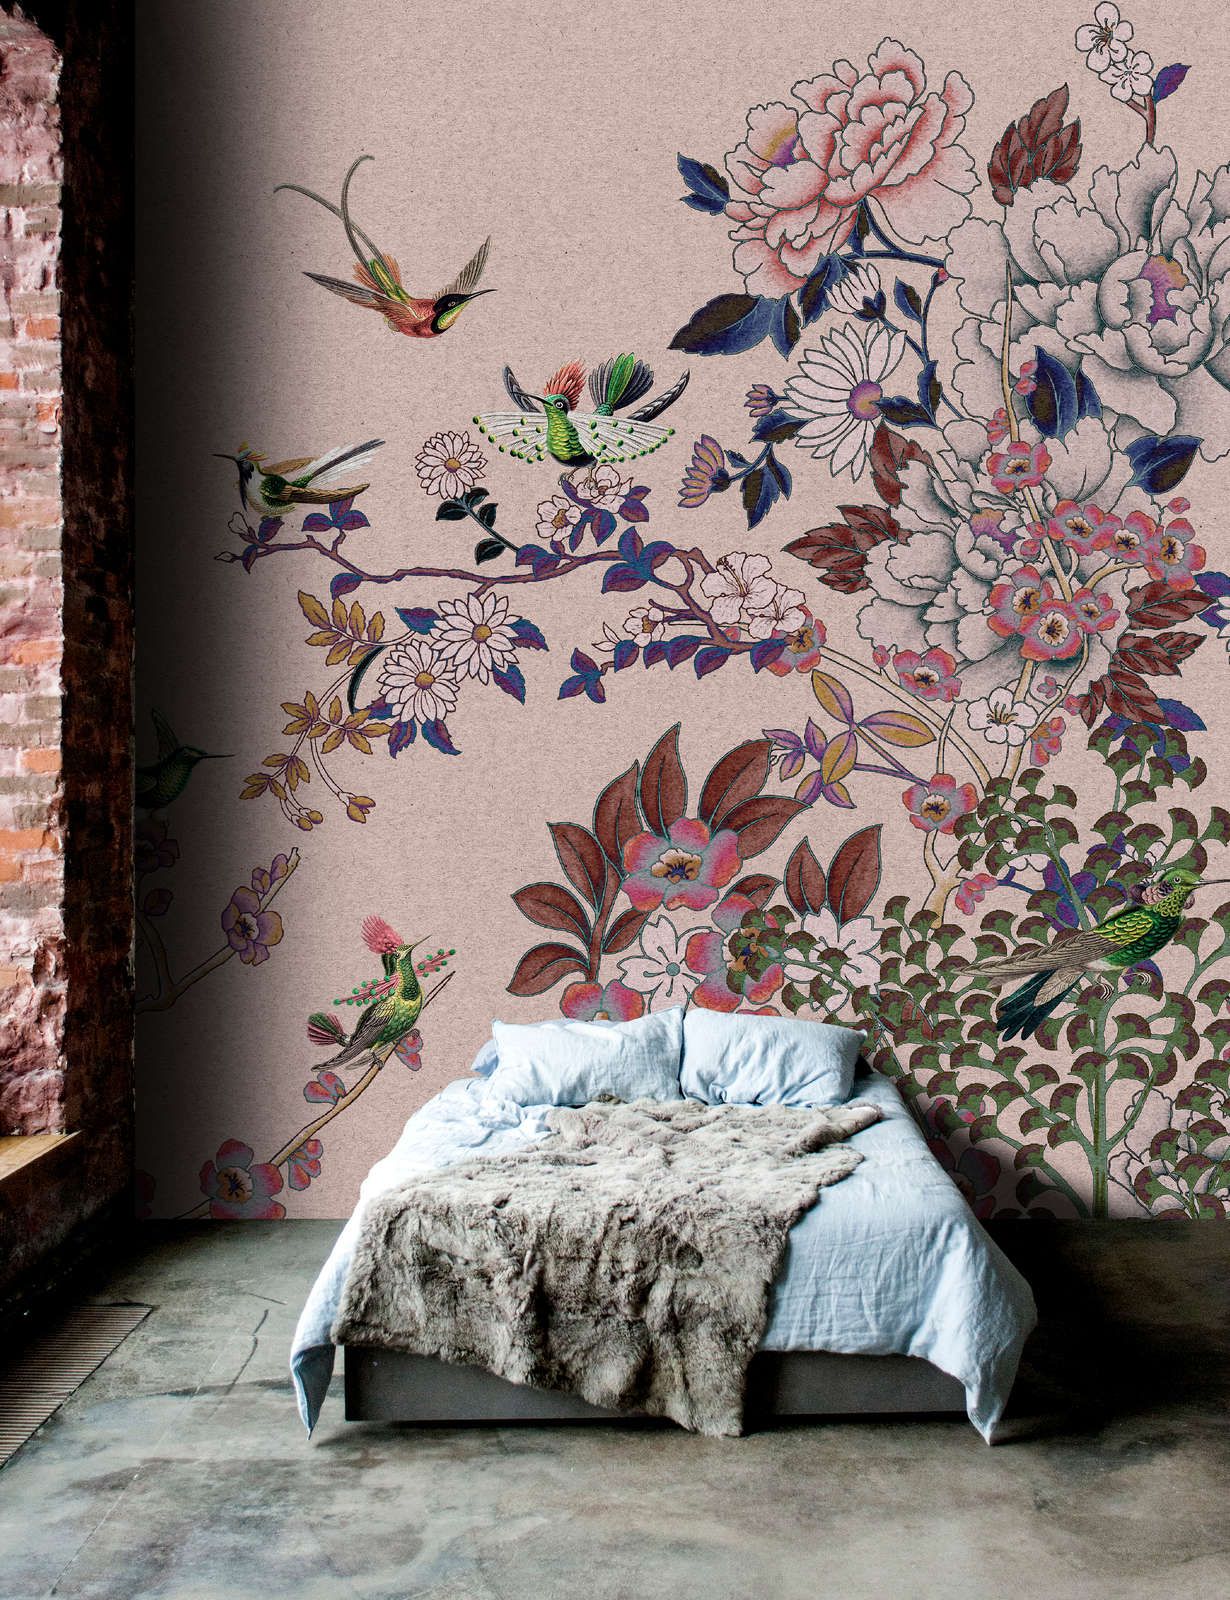             Photo wallpaper »madras 2« - Rose-coloured floral motif with hummingbirds on kraft paper texture - Smooth, slightly pearlescent non-woven fabric
        